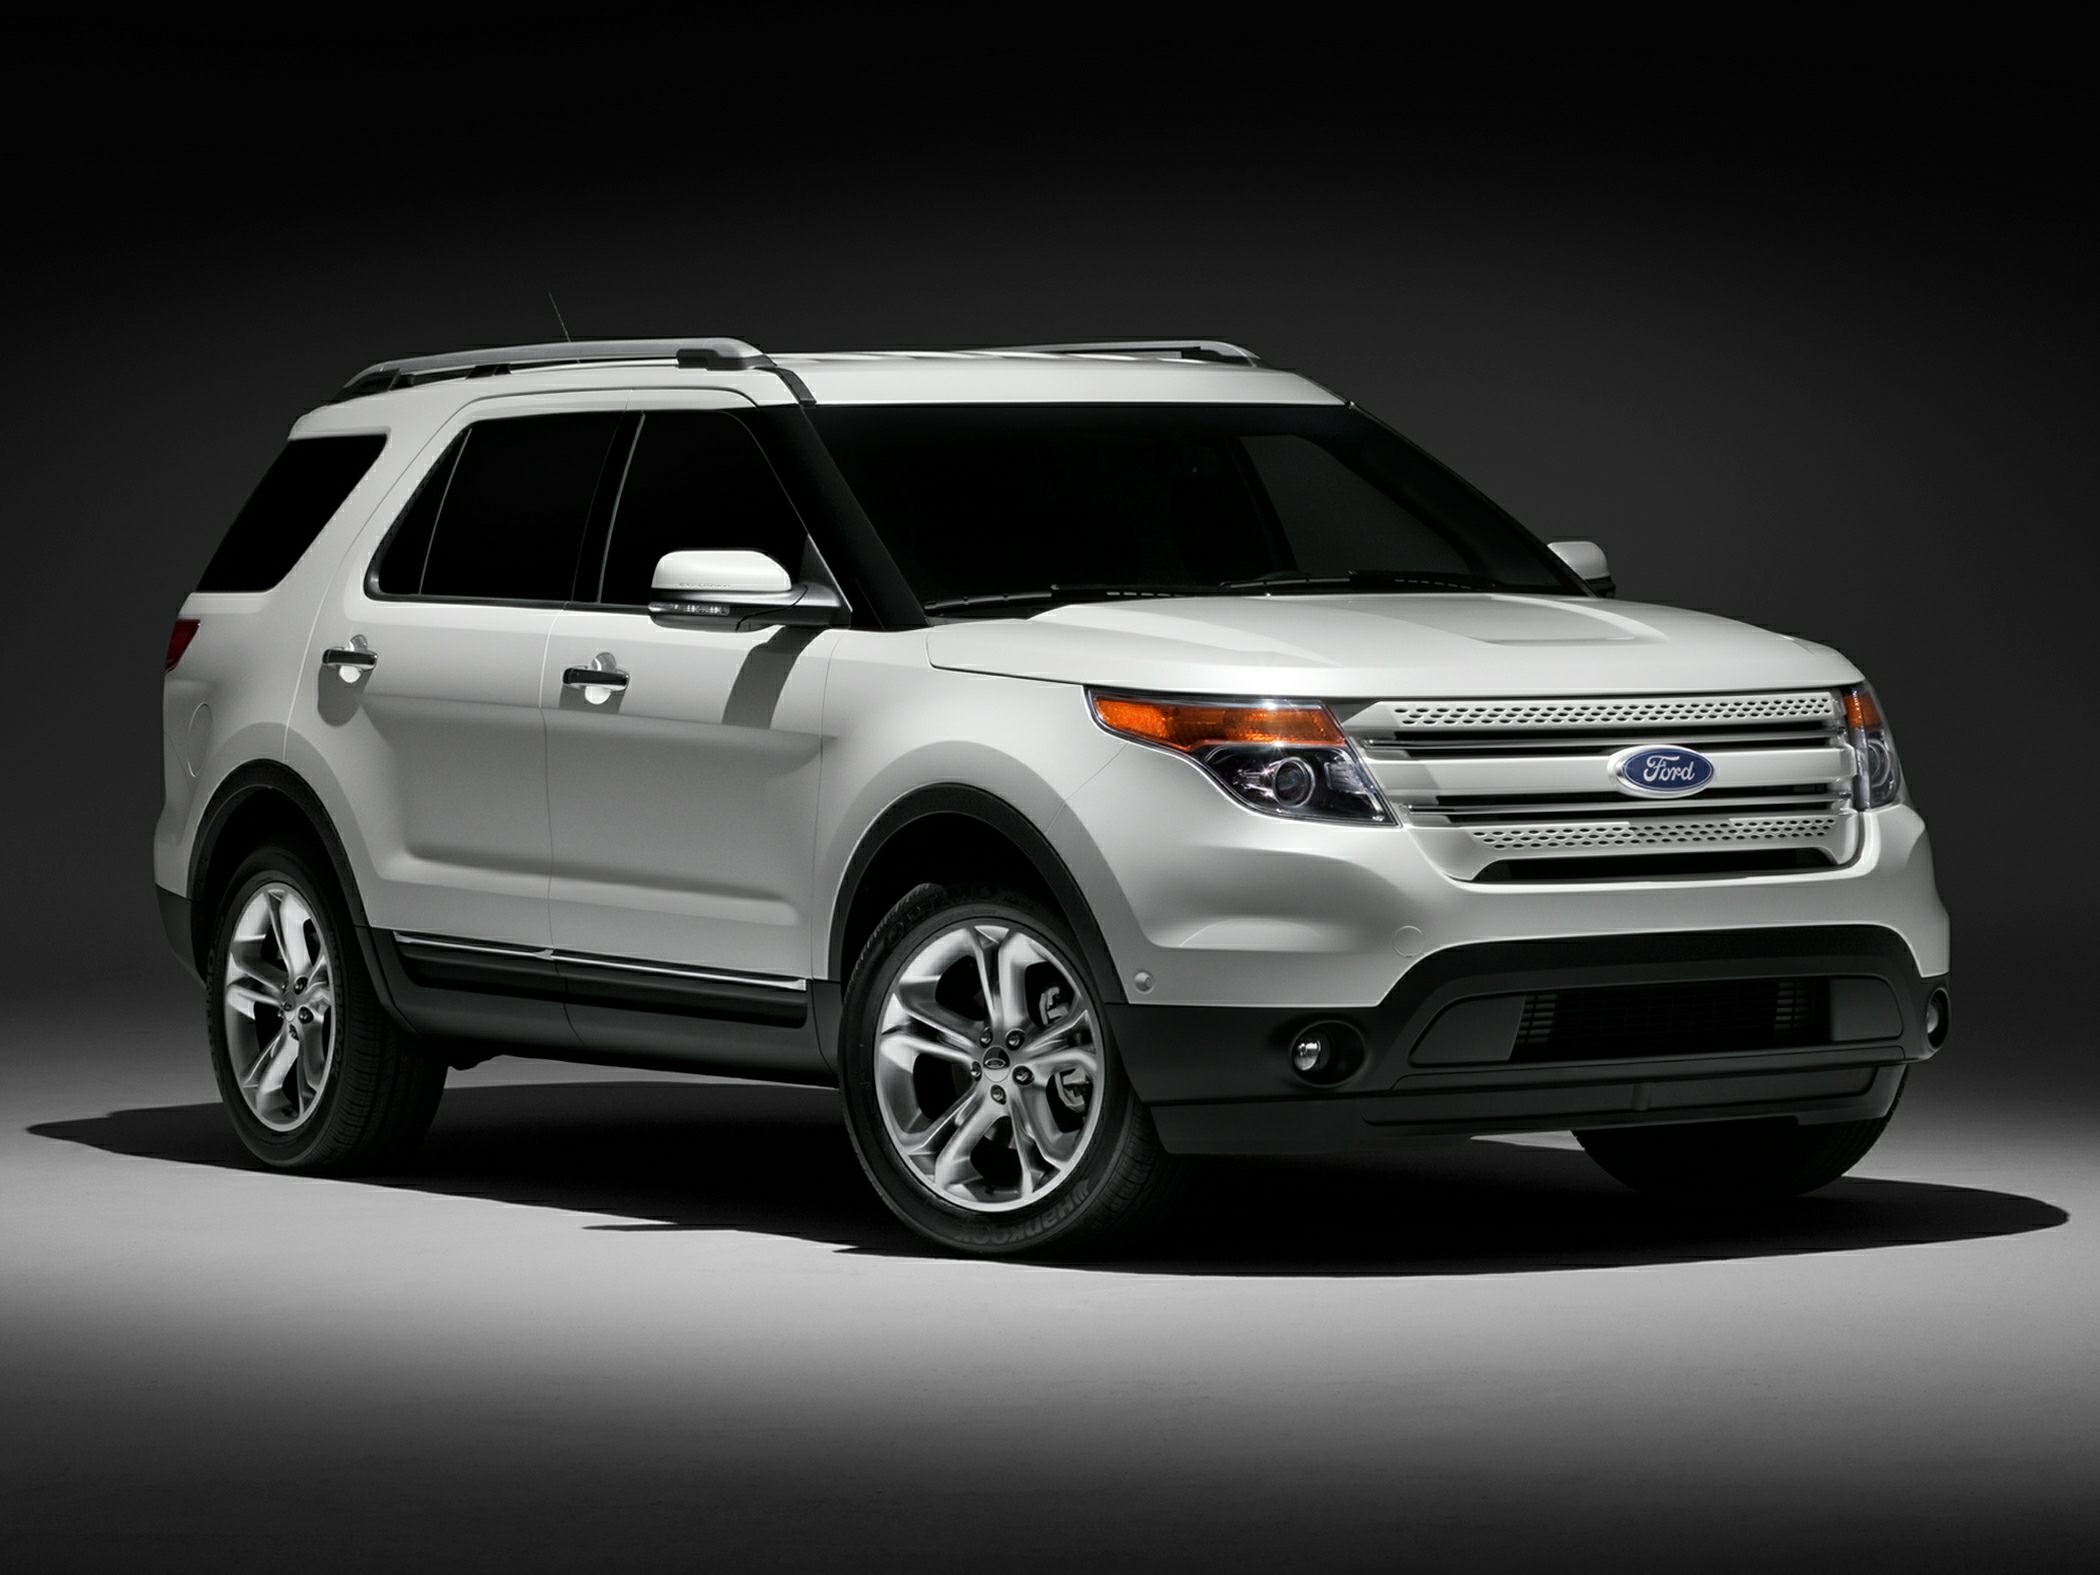 2100x1575 > Ford Explorer Wallpapers